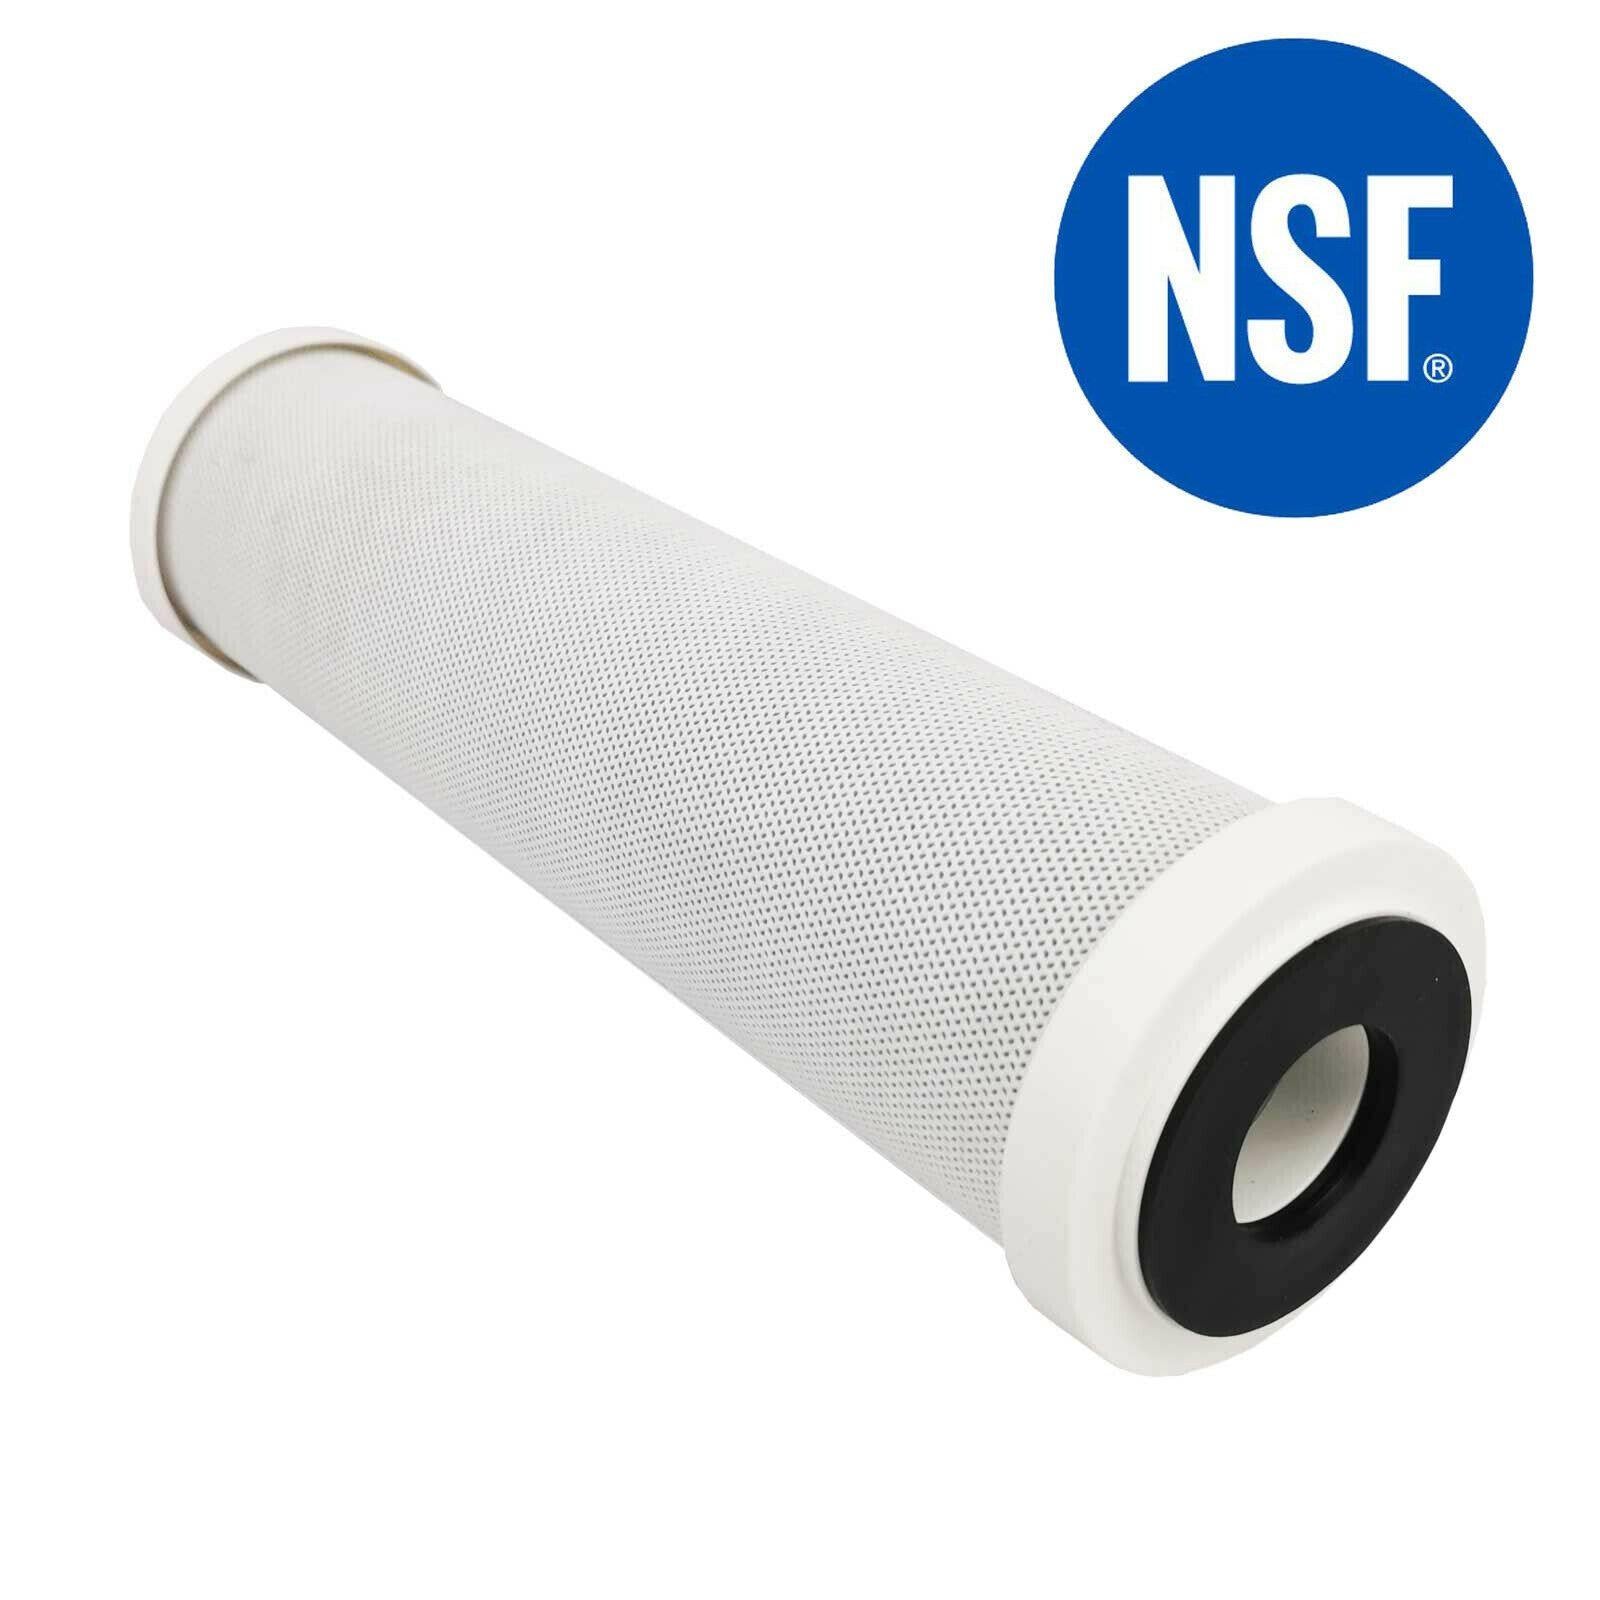 2X 0.5 Micron Carbon Water Filter Cartridges For Residential and Commercial Sparesbarn